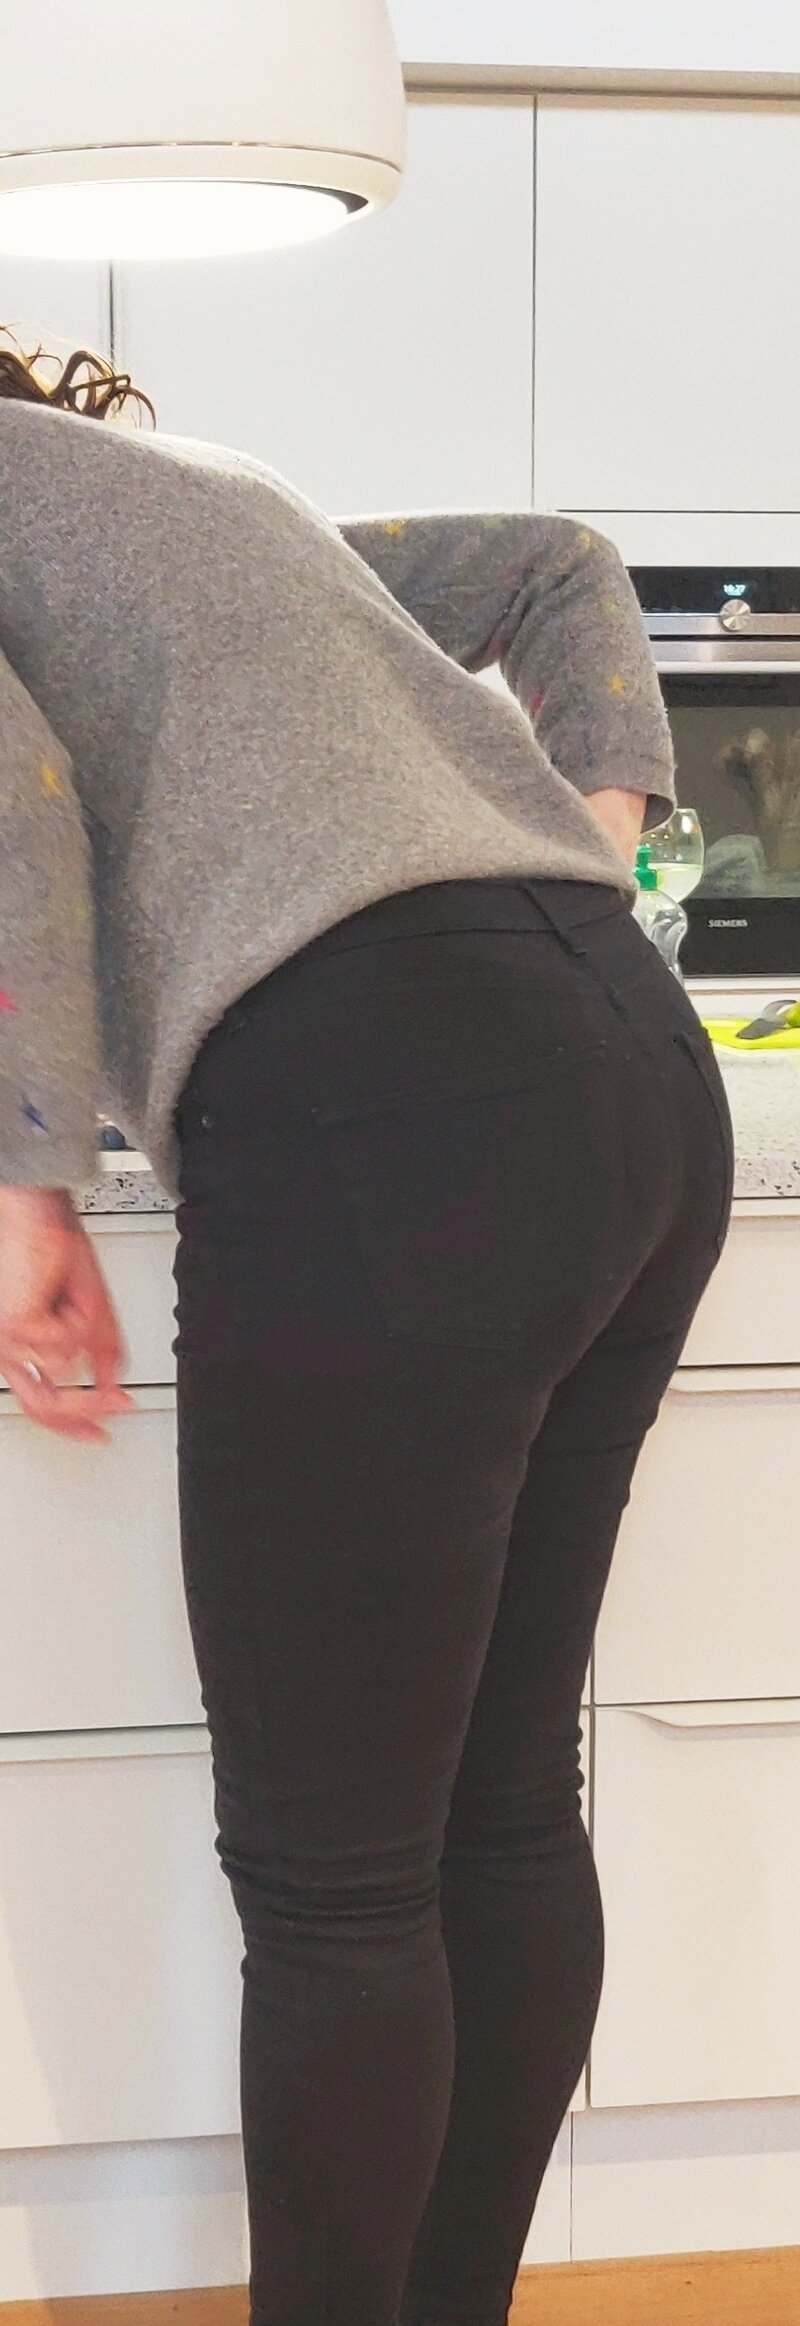 Sexy wife's amazing ass picture